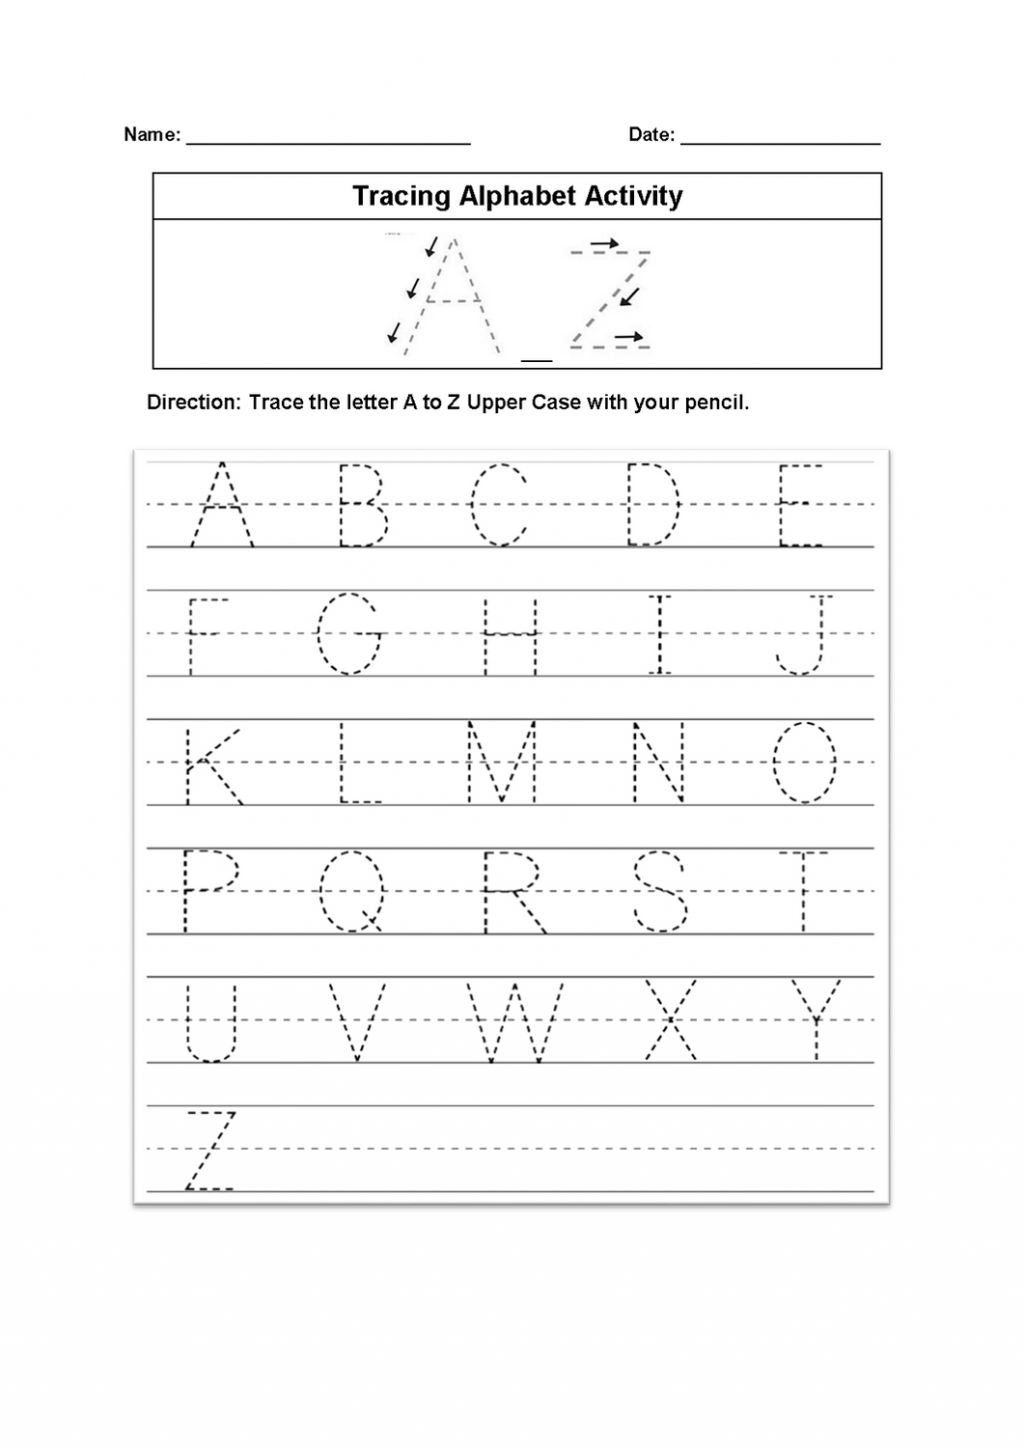 christmas-abc-order-worksheets-cut-and-paste-mamas-letter-alphabetical-order-worksheet